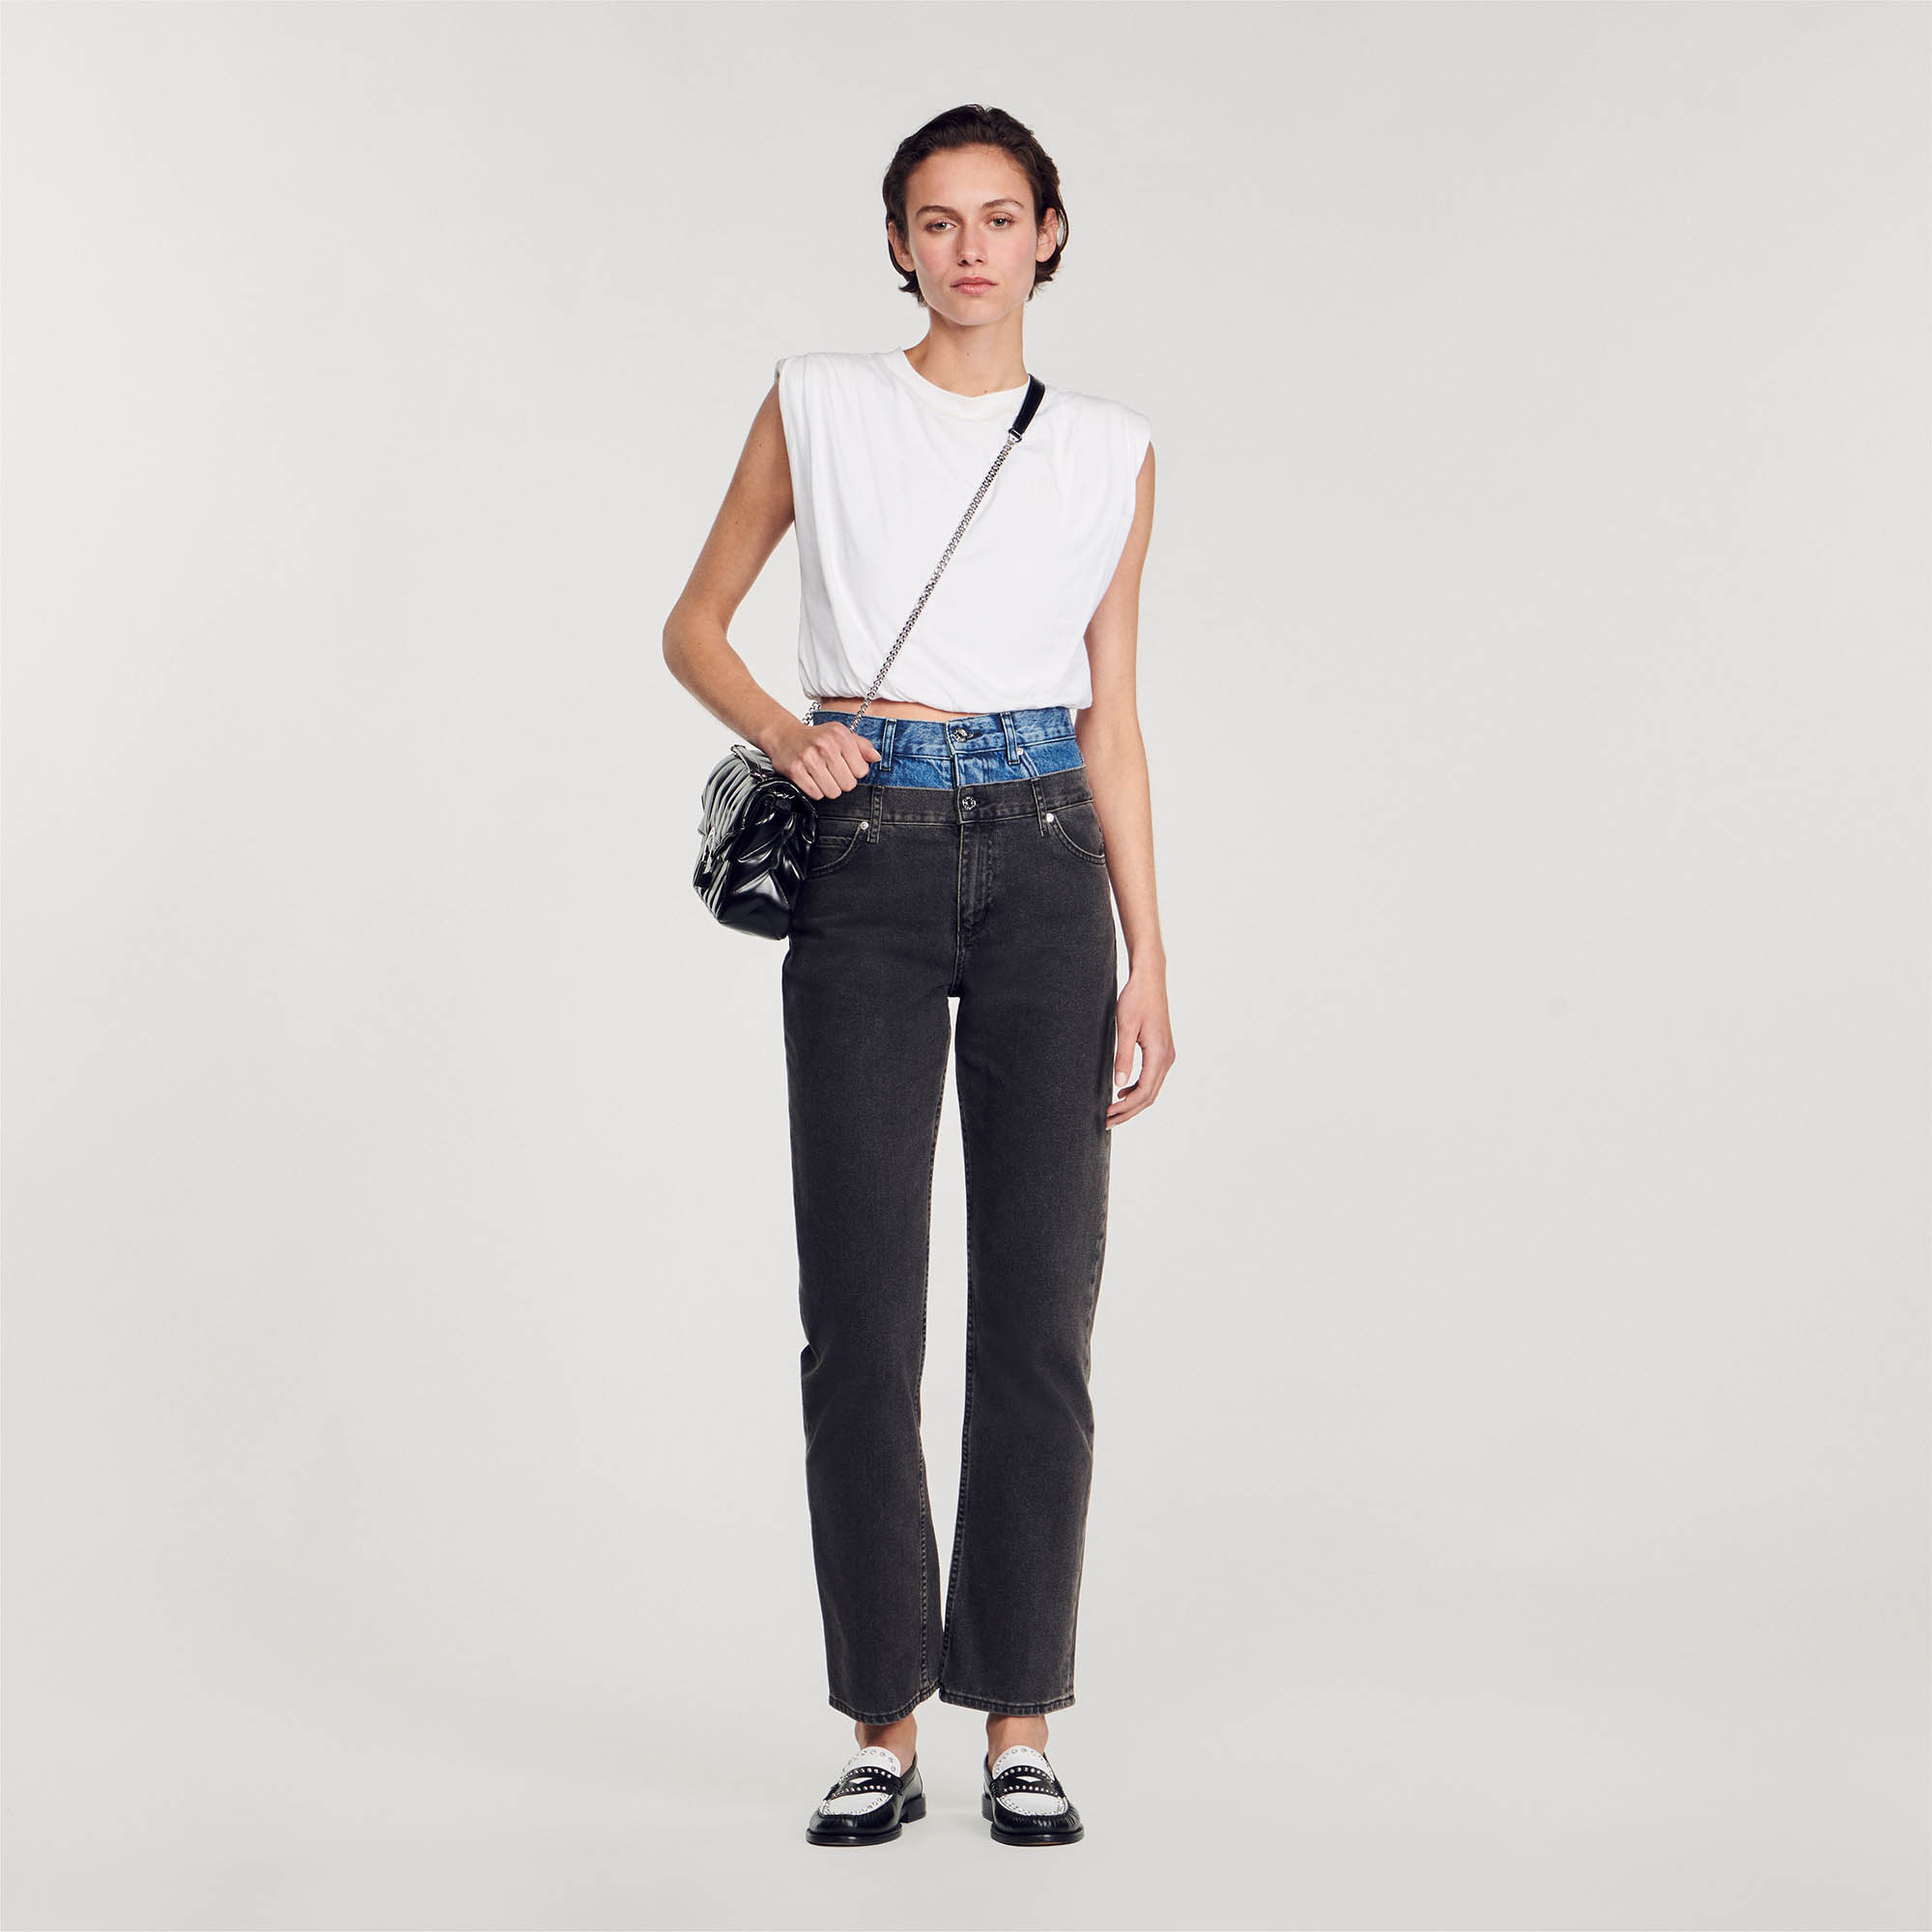 Sandro Two-tone double-waisted jeans